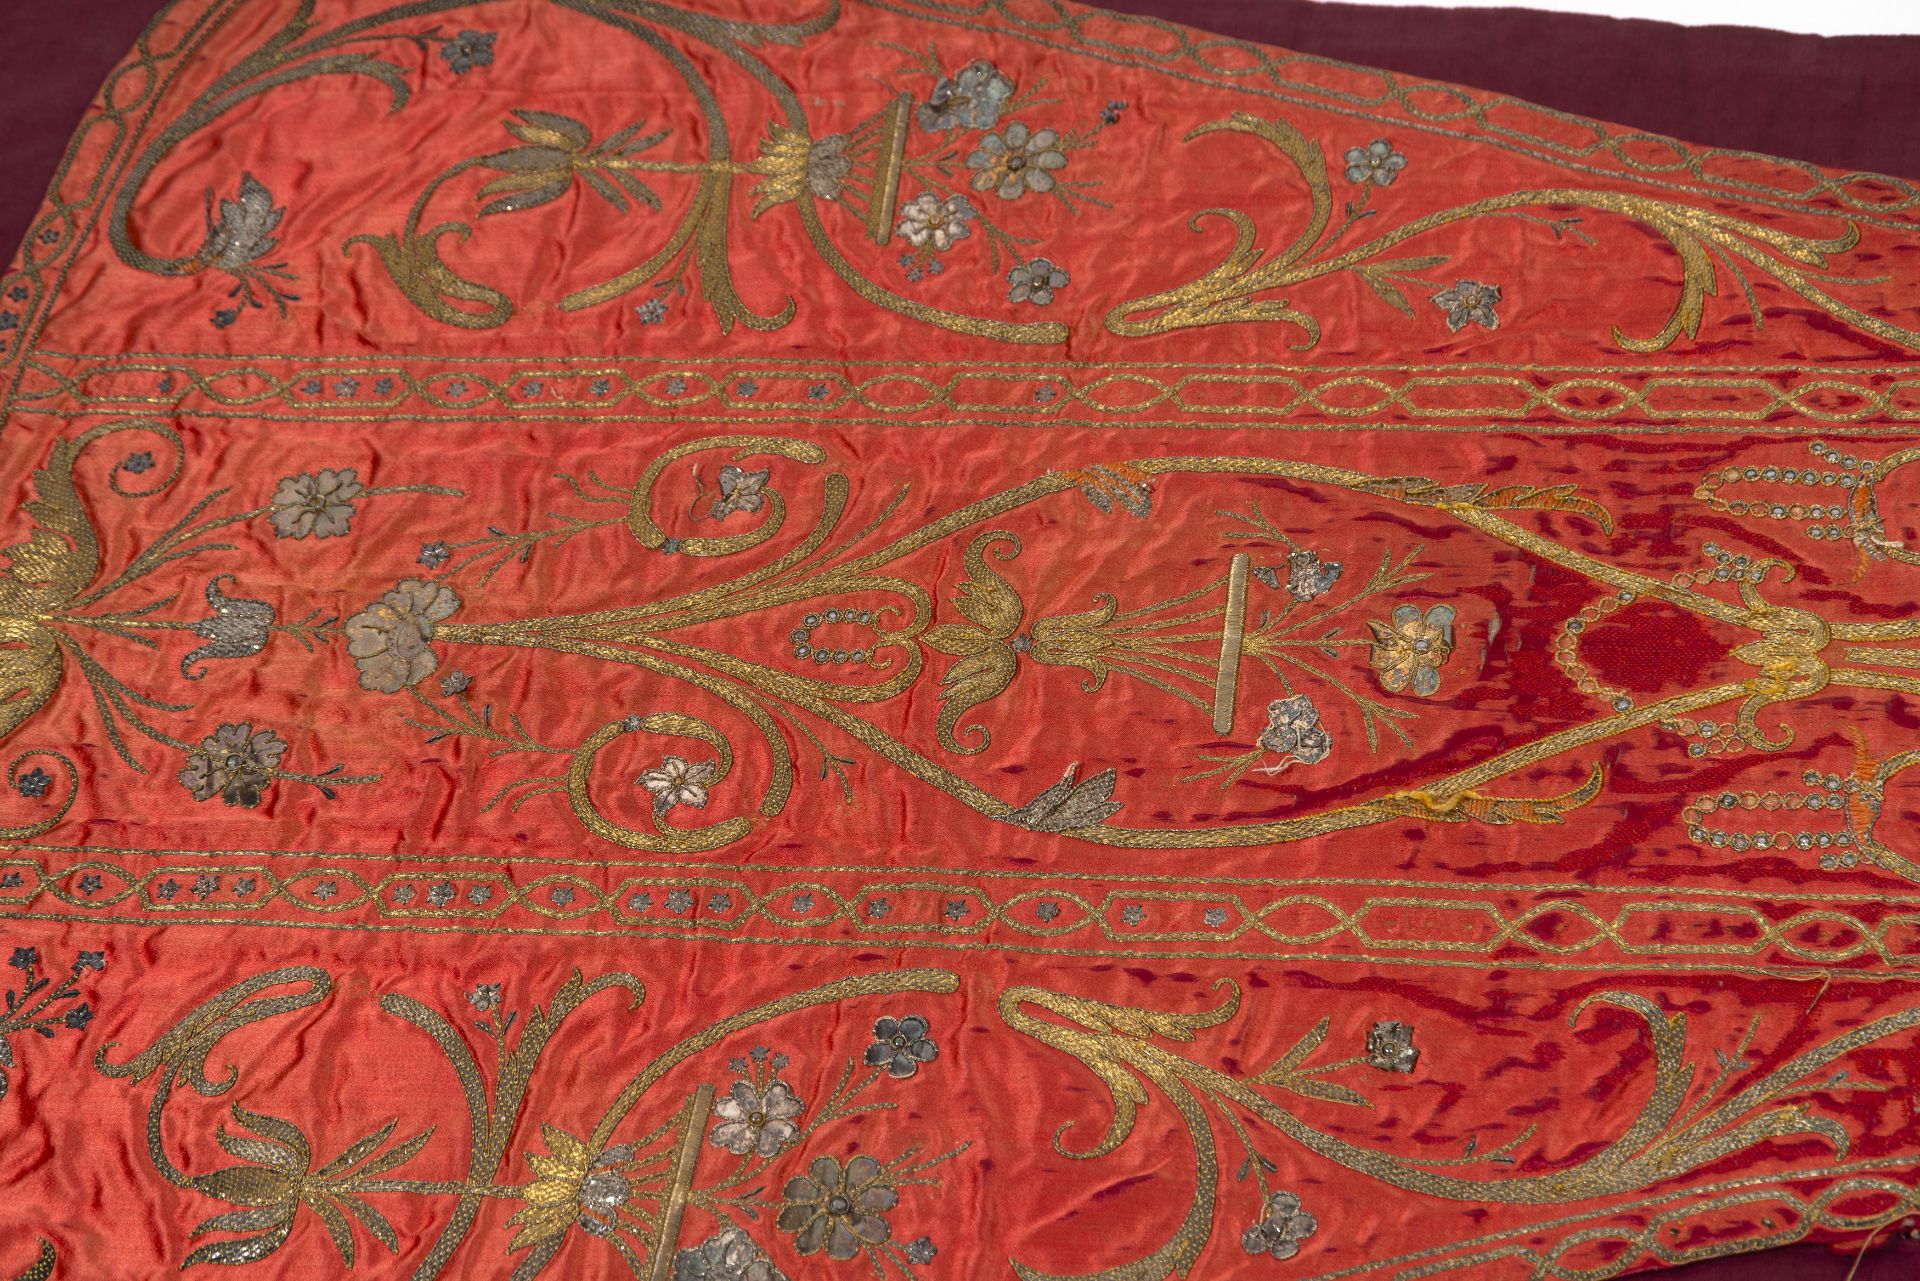 Ecclesiastical Priest's Chasuble, in silk, 19th century - Image 3 of 6